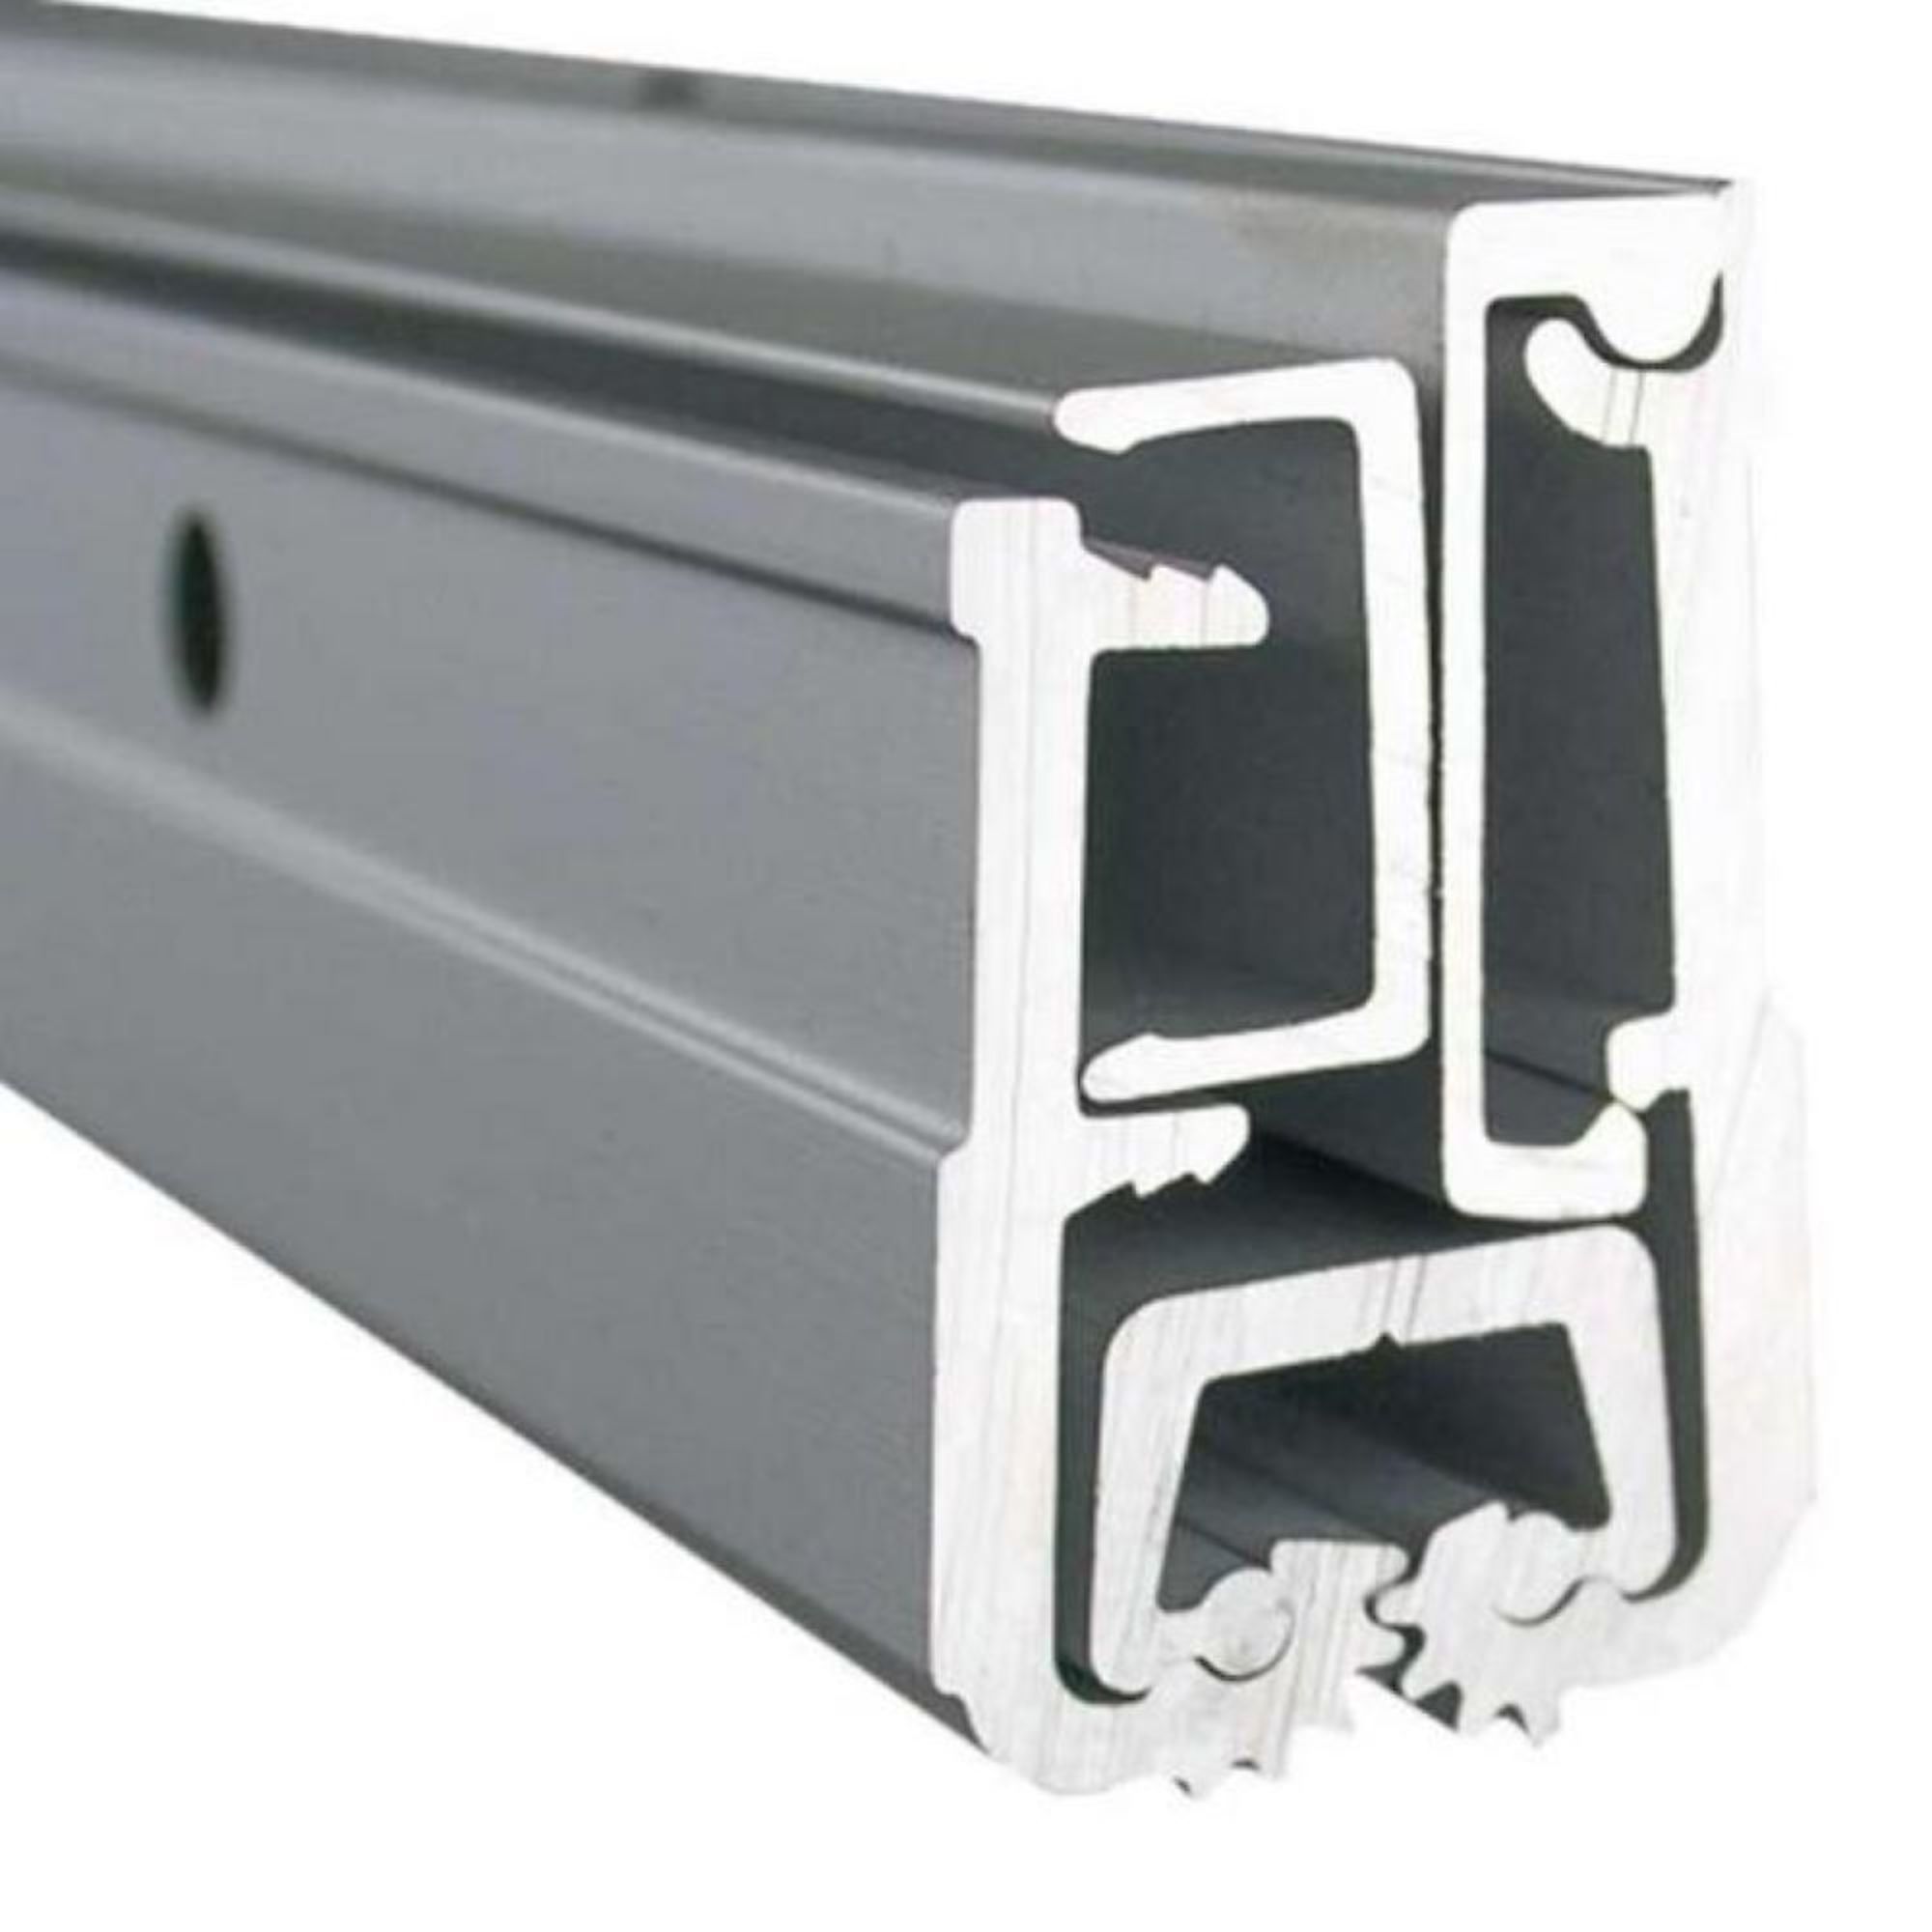 Global Door Controls, 83Inch Full Surface Limited Frame Continuous Hinge, Model THY-1183LFHD-AL